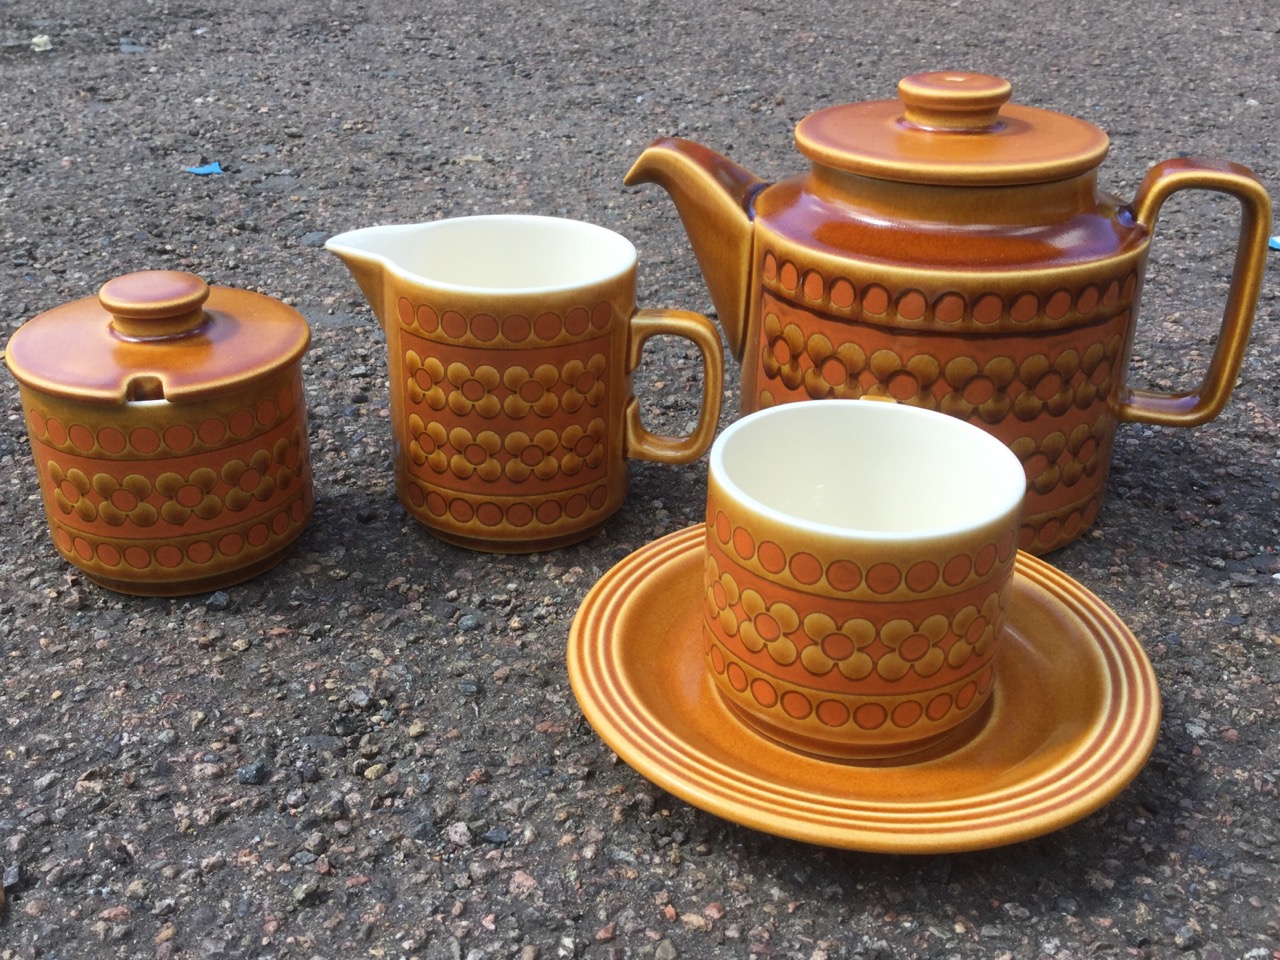 An extensive Hornsea dinner & breakfast set decorated in the Saffron pattern with plates, cups & - Image 3 of 3